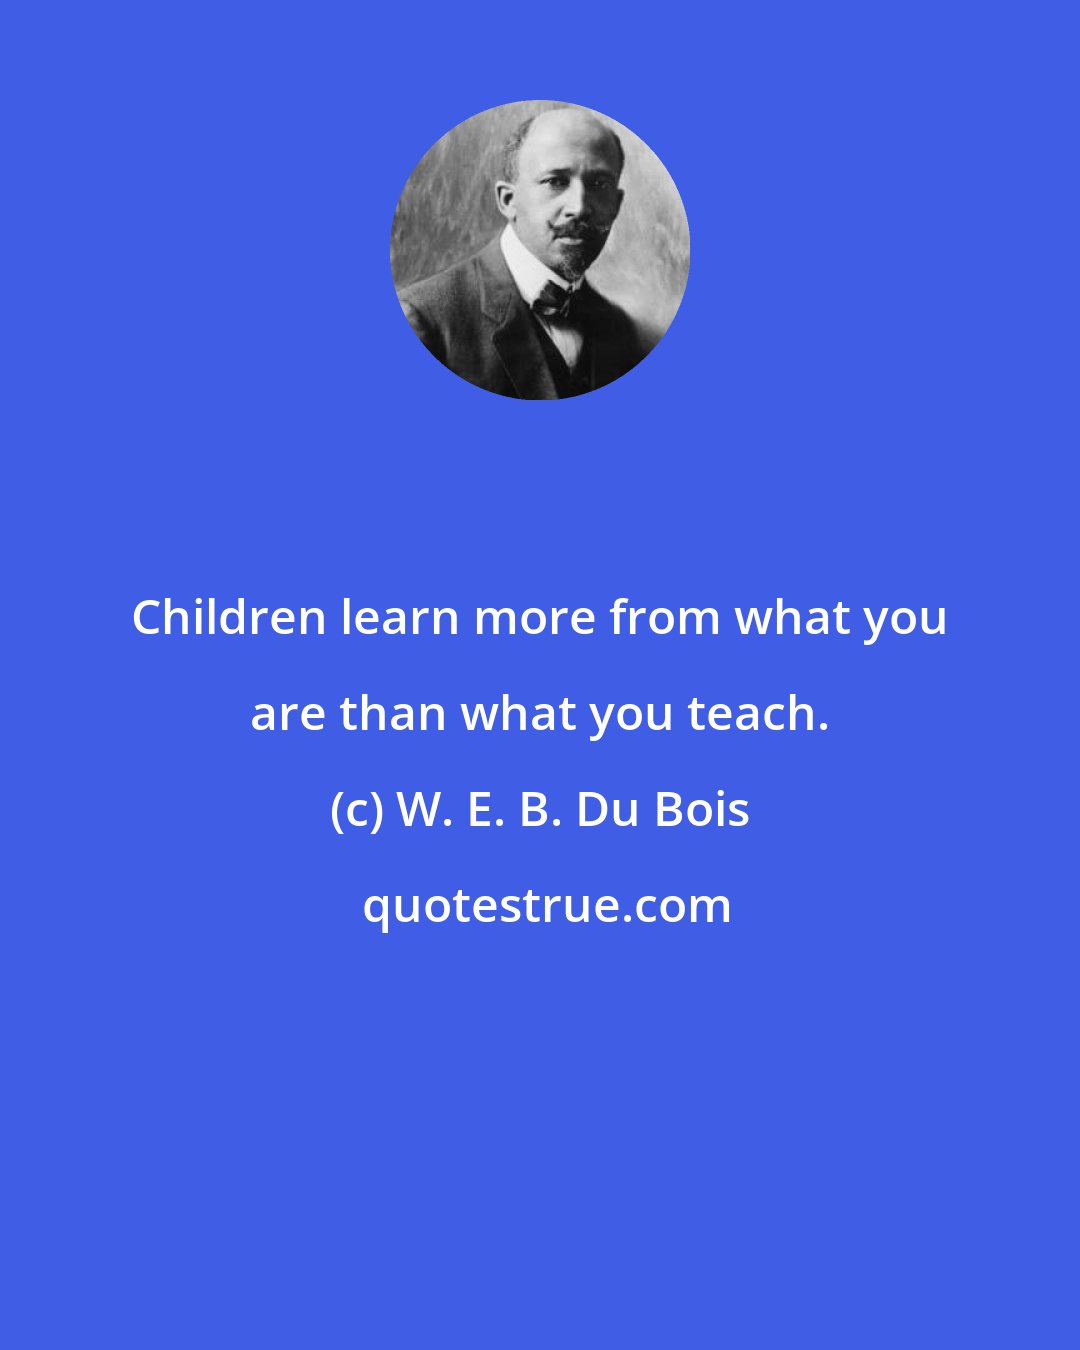 W. E. B. Du Bois: Children learn more from what you are than what you teach.